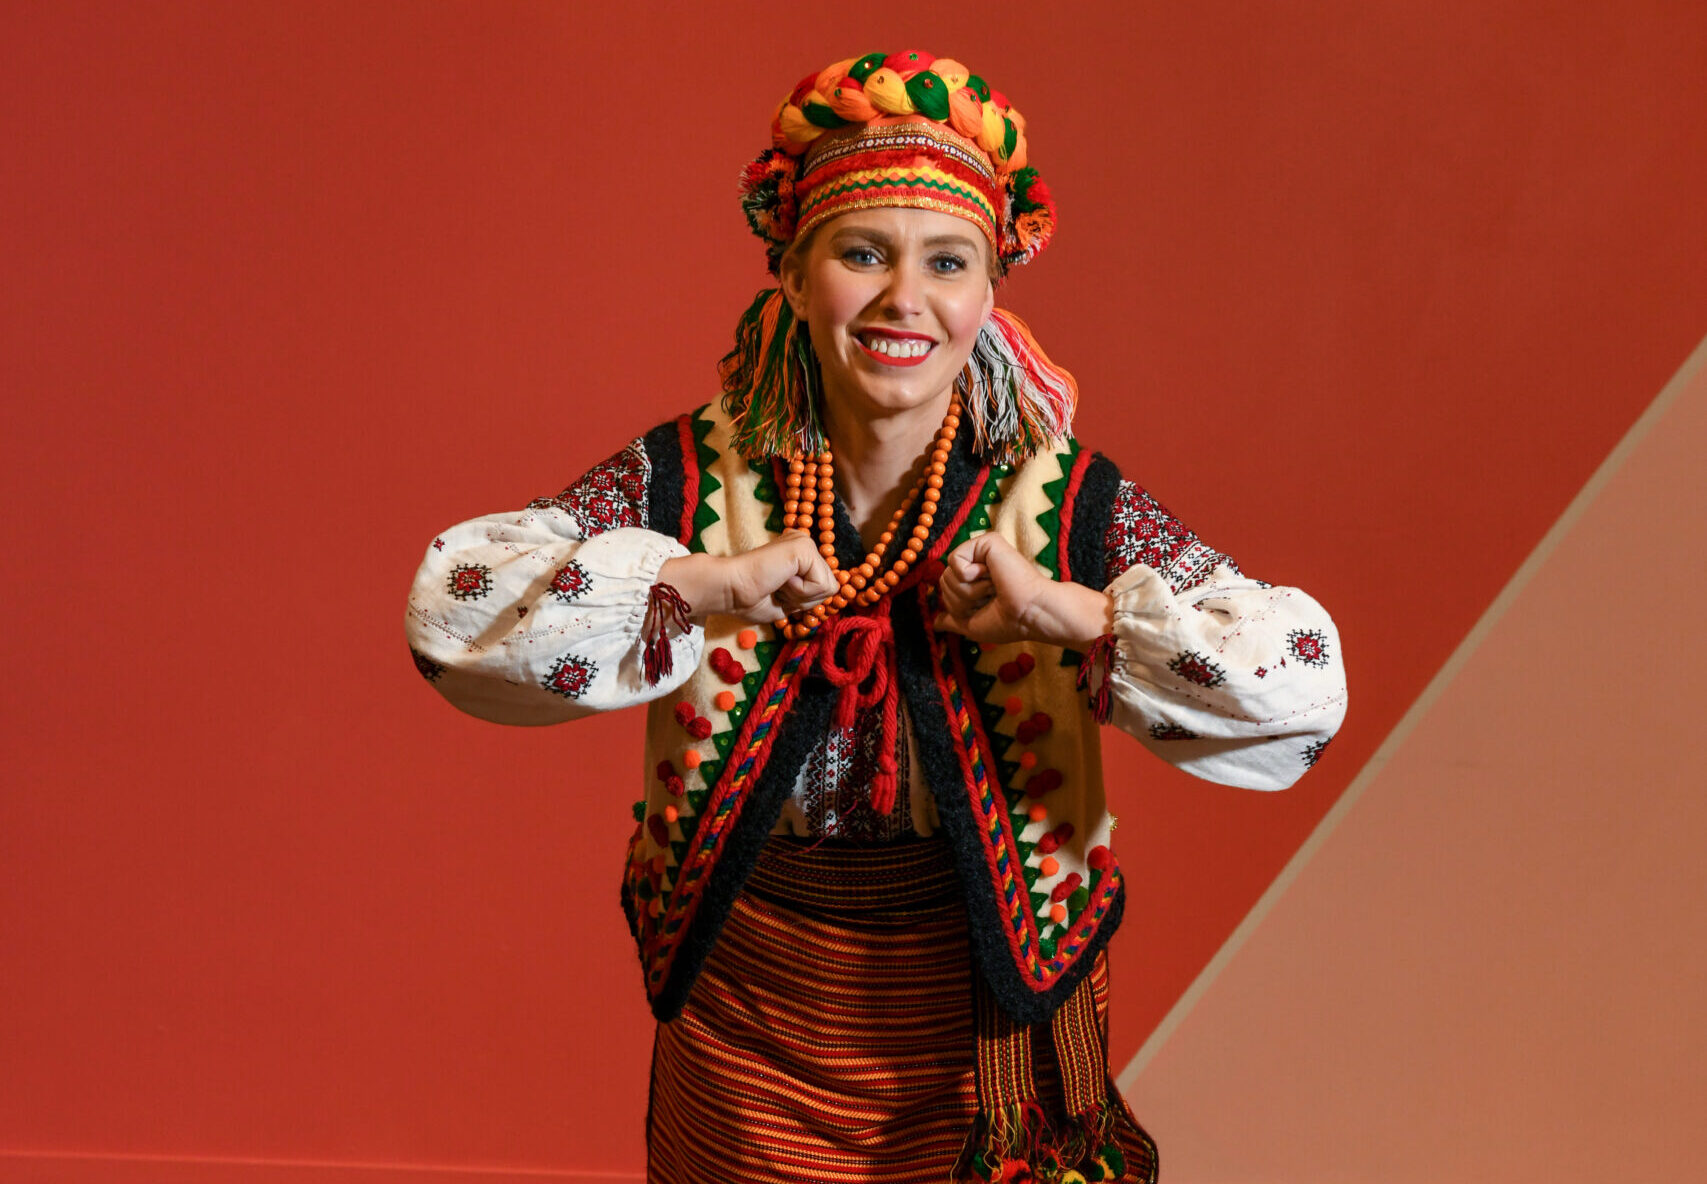 A dancer wears a green, orange, and yellow hat with an embroidered vest and long skirt. She is holding out her elbows with her thumbs pointed into her chest while leaning forward and smiling.